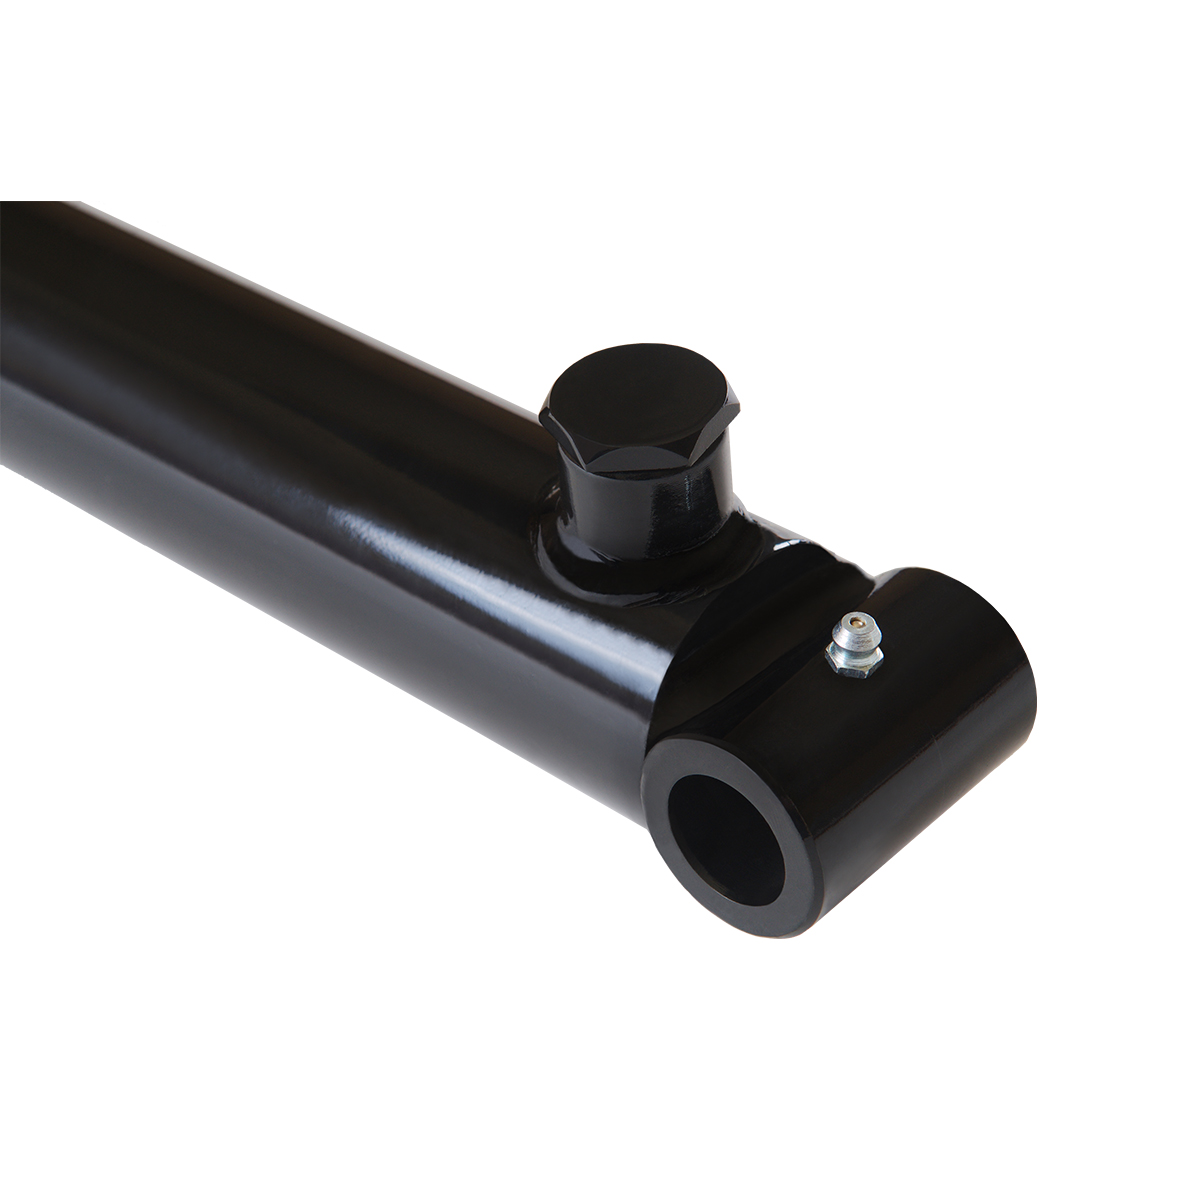 1.5 bore x 24 stroke hydraulic cylinder, welded cross tube double acting cylinder | Magister Hydraulics